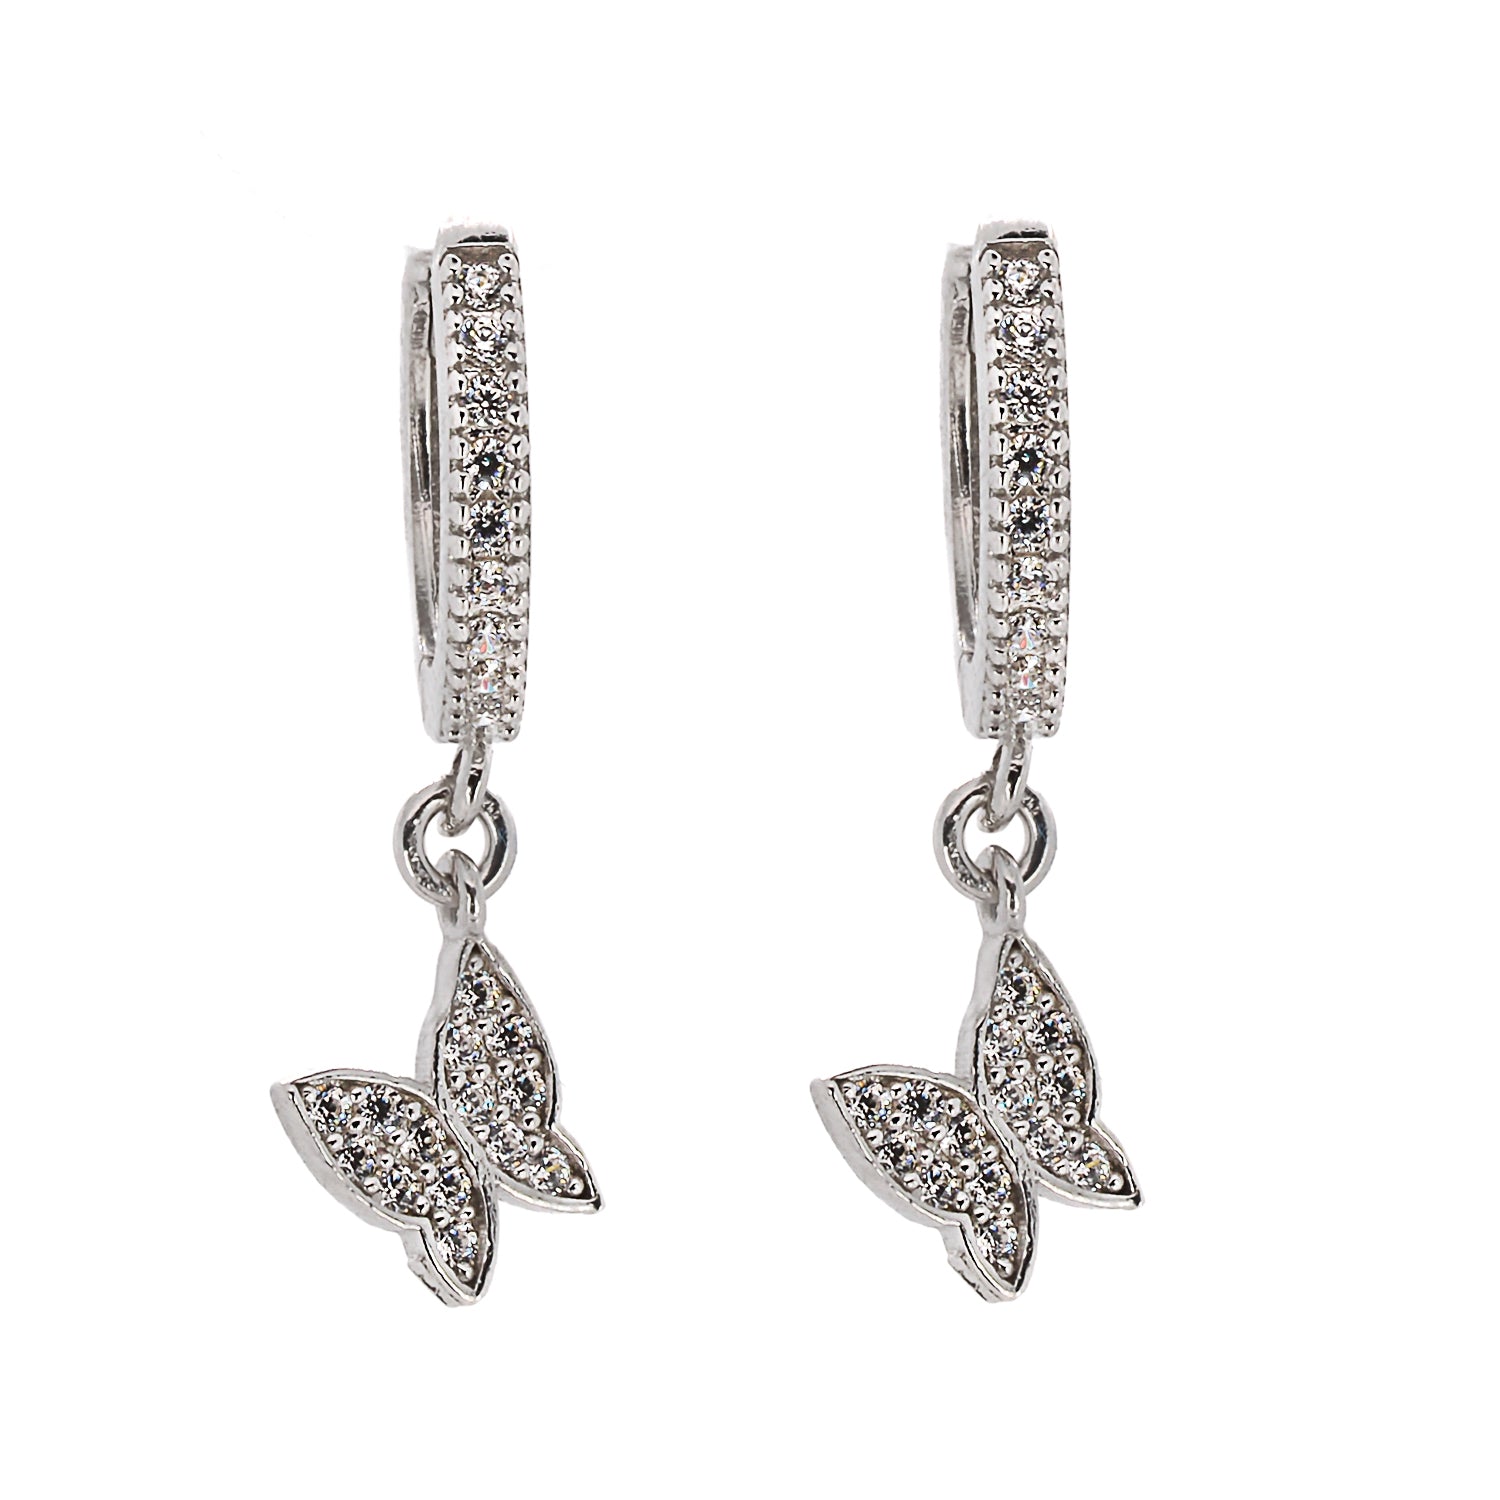 Silver Sparkly Butterfly Earrings with CZ diamonds, a symbol of elegance and grace